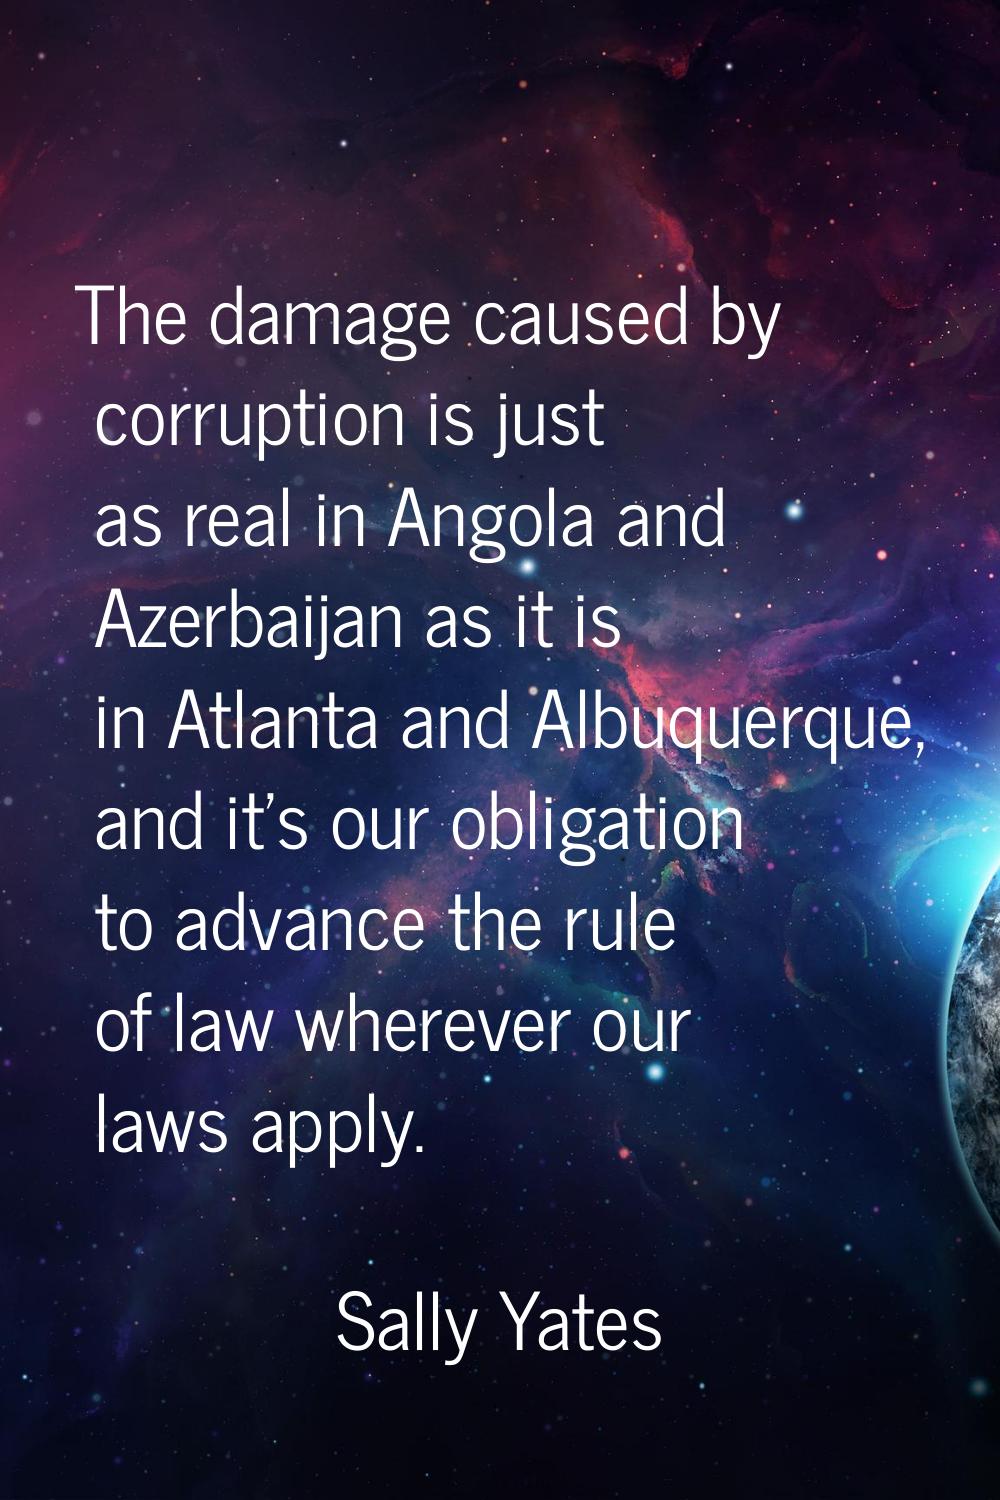 The damage caused by corruption is just as real in Angola and Azerbaijan as it is in Atlanta and Al